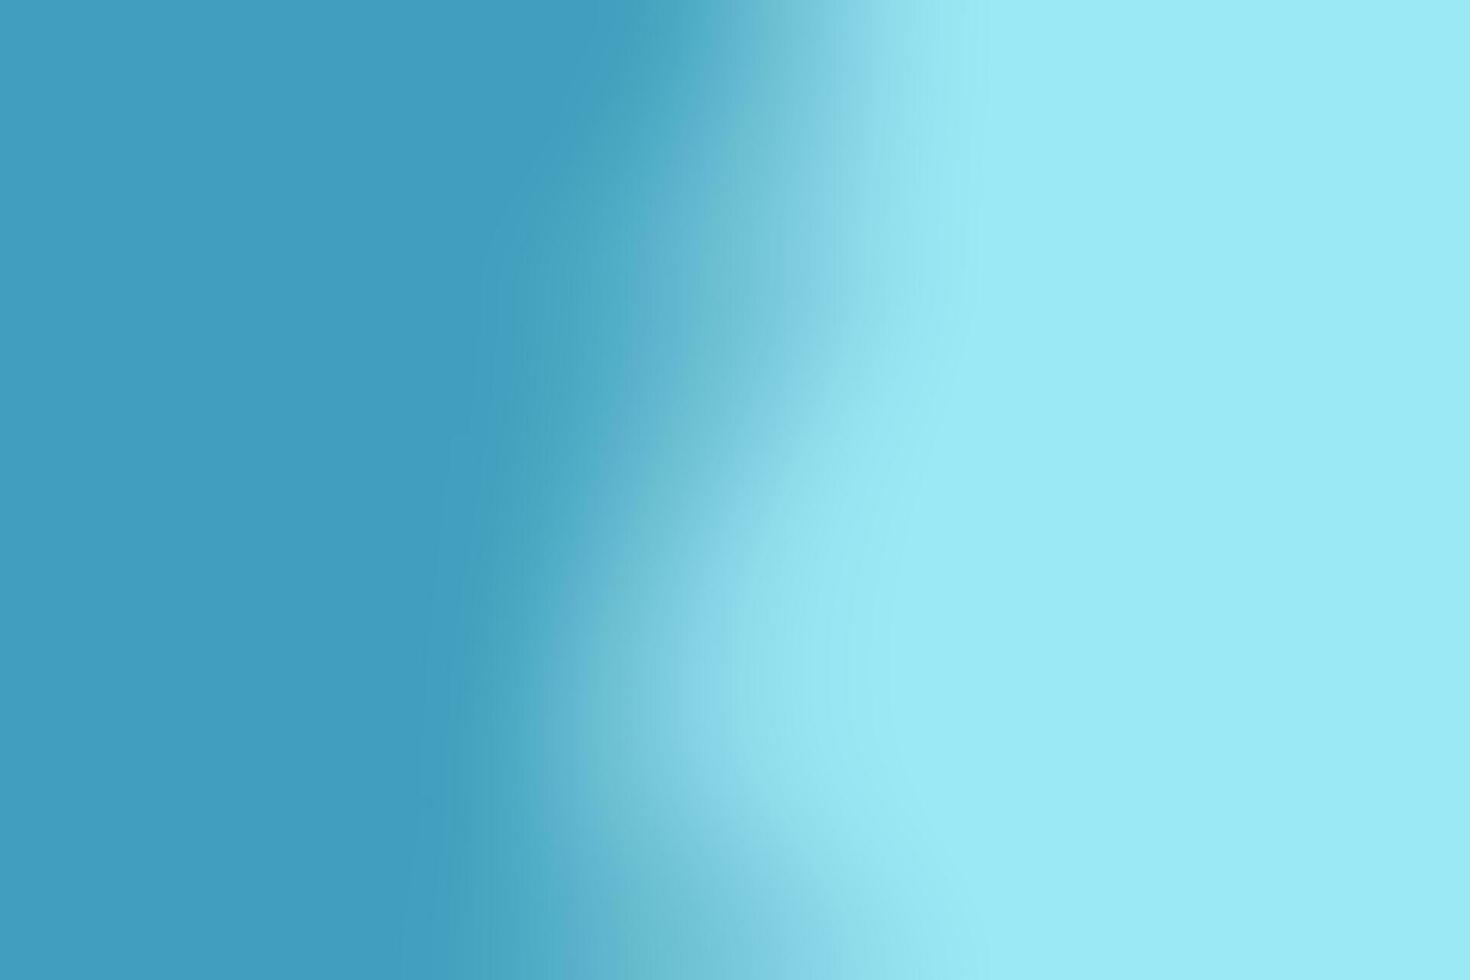 Vector gradient background with blue and white colors. Vector illustration